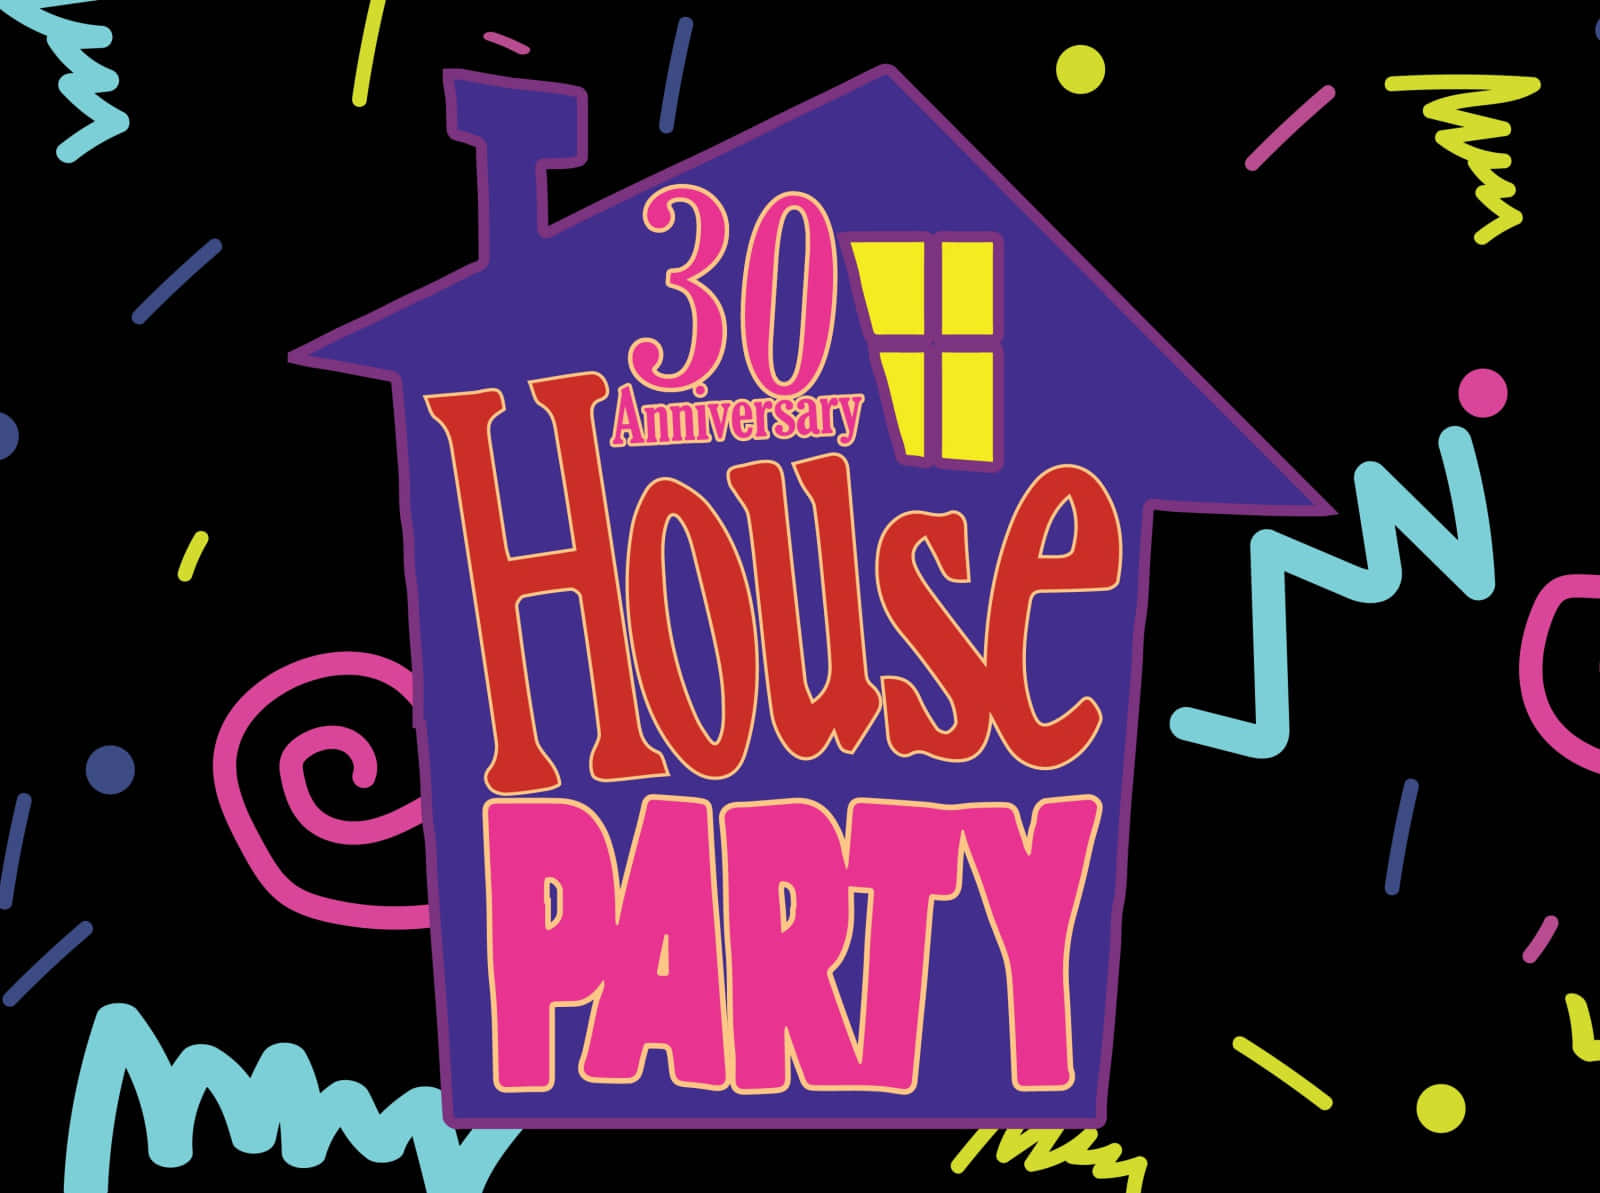 house party wallpaper